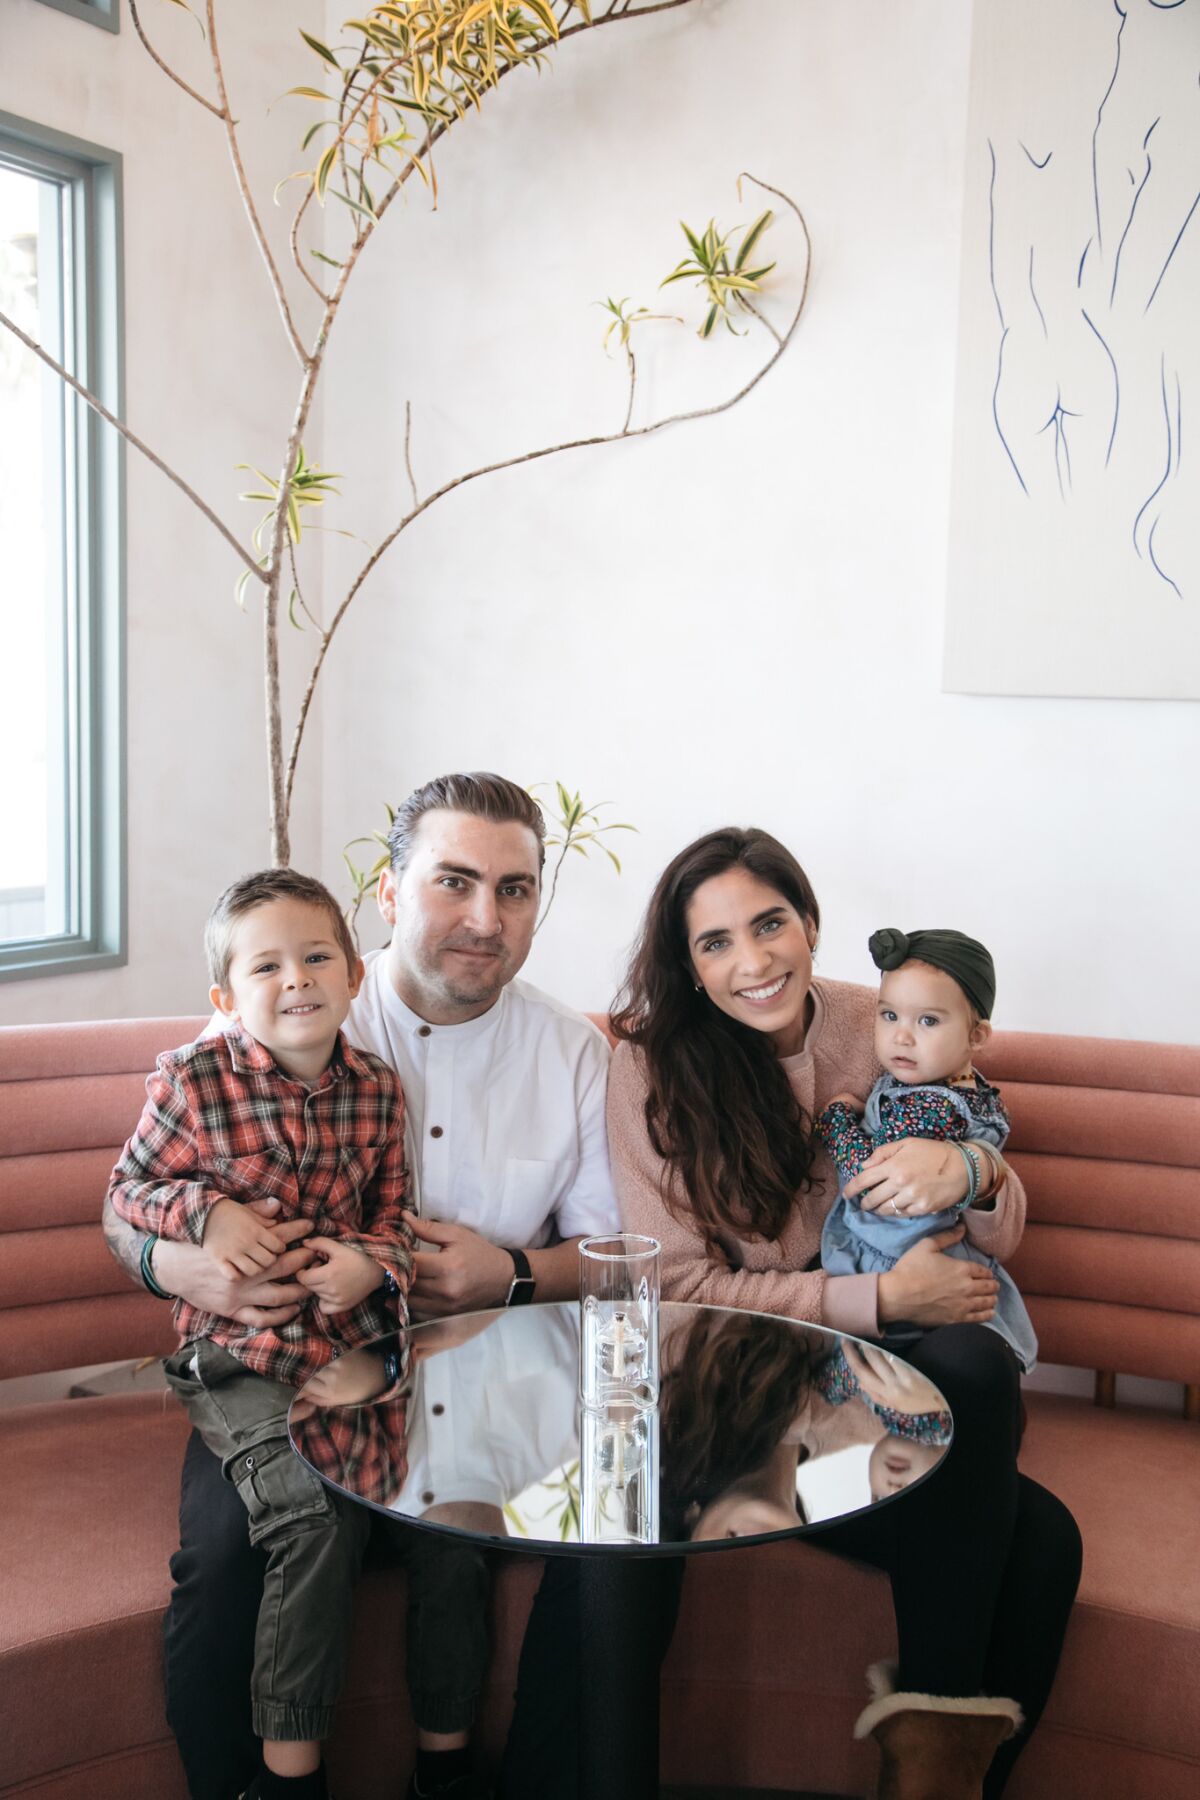 Former Jeune et Jolie chef Andrew Bachelier in December 2018 with his fiancée Larah, and their children.